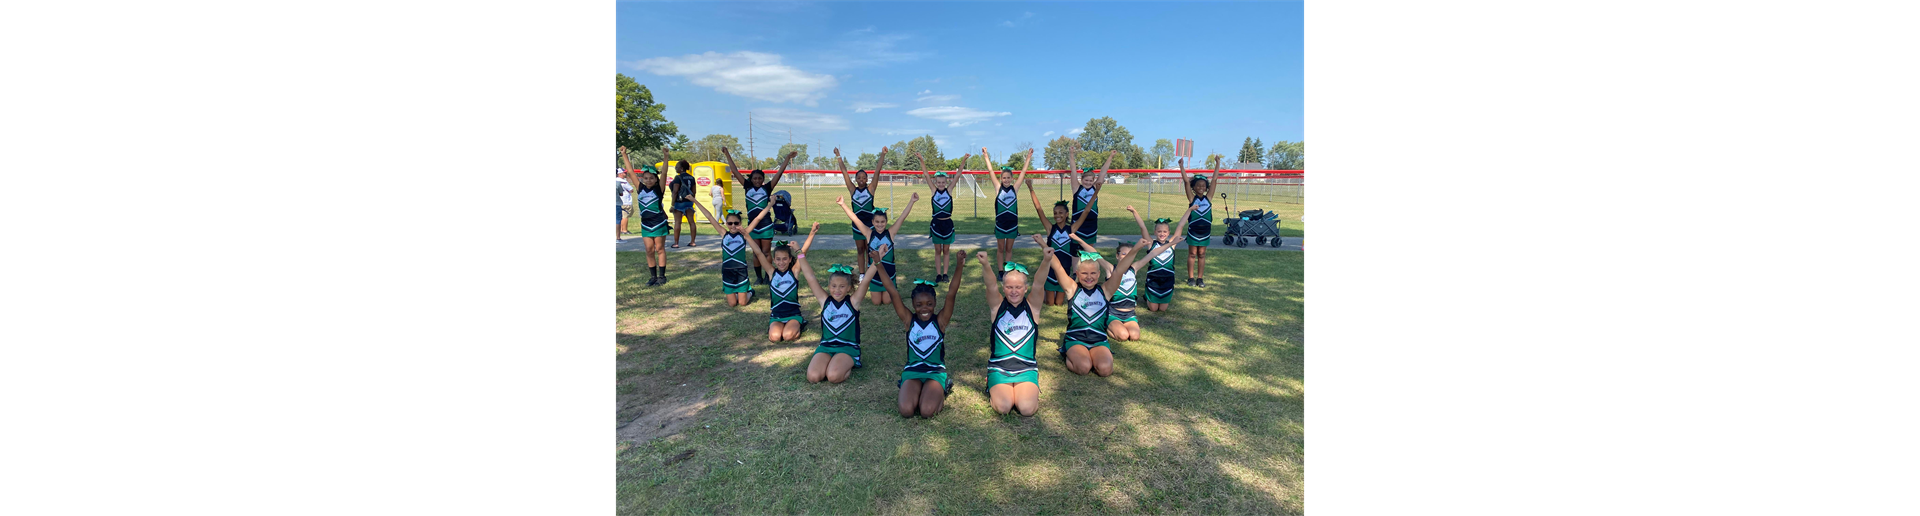 S.C.S GREEN HORNETS YOUTH FOOTBALL & CHEER